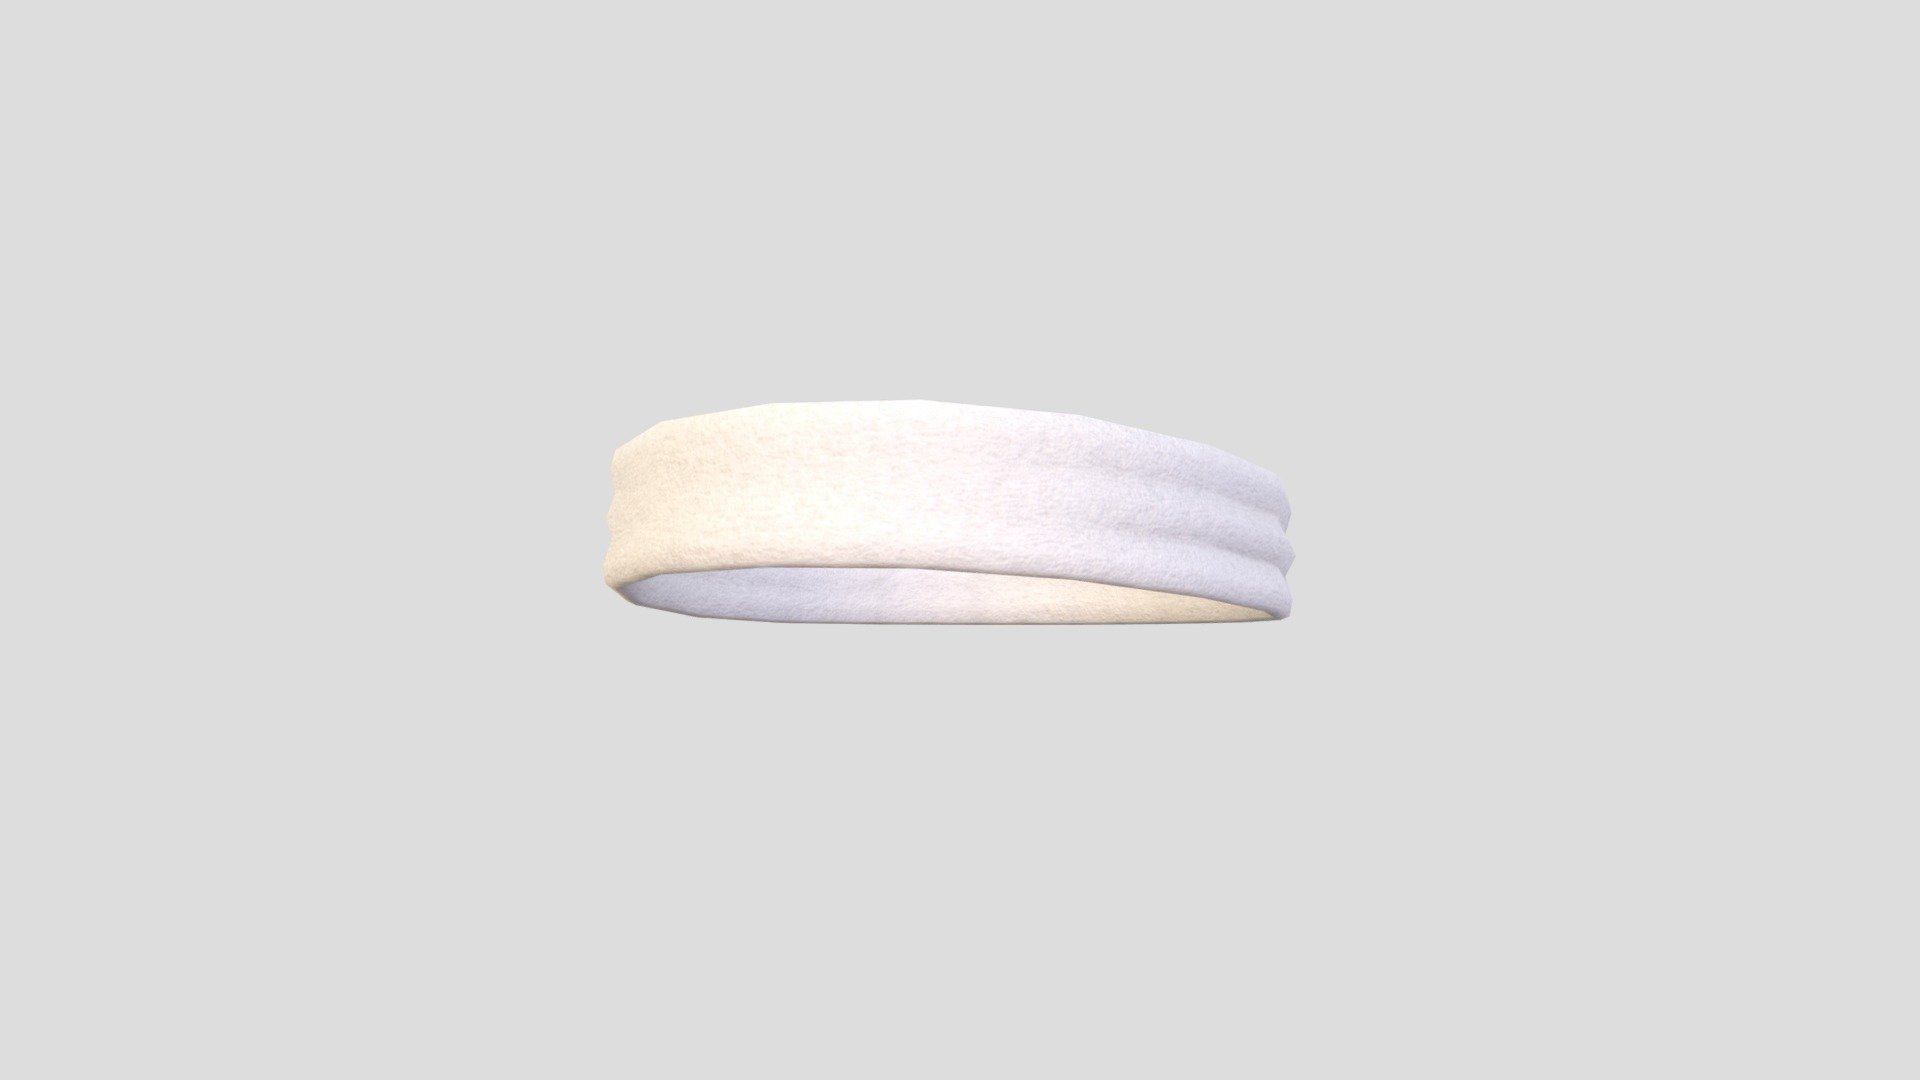 Sport Headband          

3d model.          


Ready for your Game, App, Animation, etc.          

File Format:          

-3ds Max 2022          

-FBX          

-OBJ          
   


PNG texture               

2048 x 2048                


- Diffuse                        

- Normal Map                            

- Roughness                         



Completely UVunwrapped.          

Non-overlapping.          


Clean topology 3d model